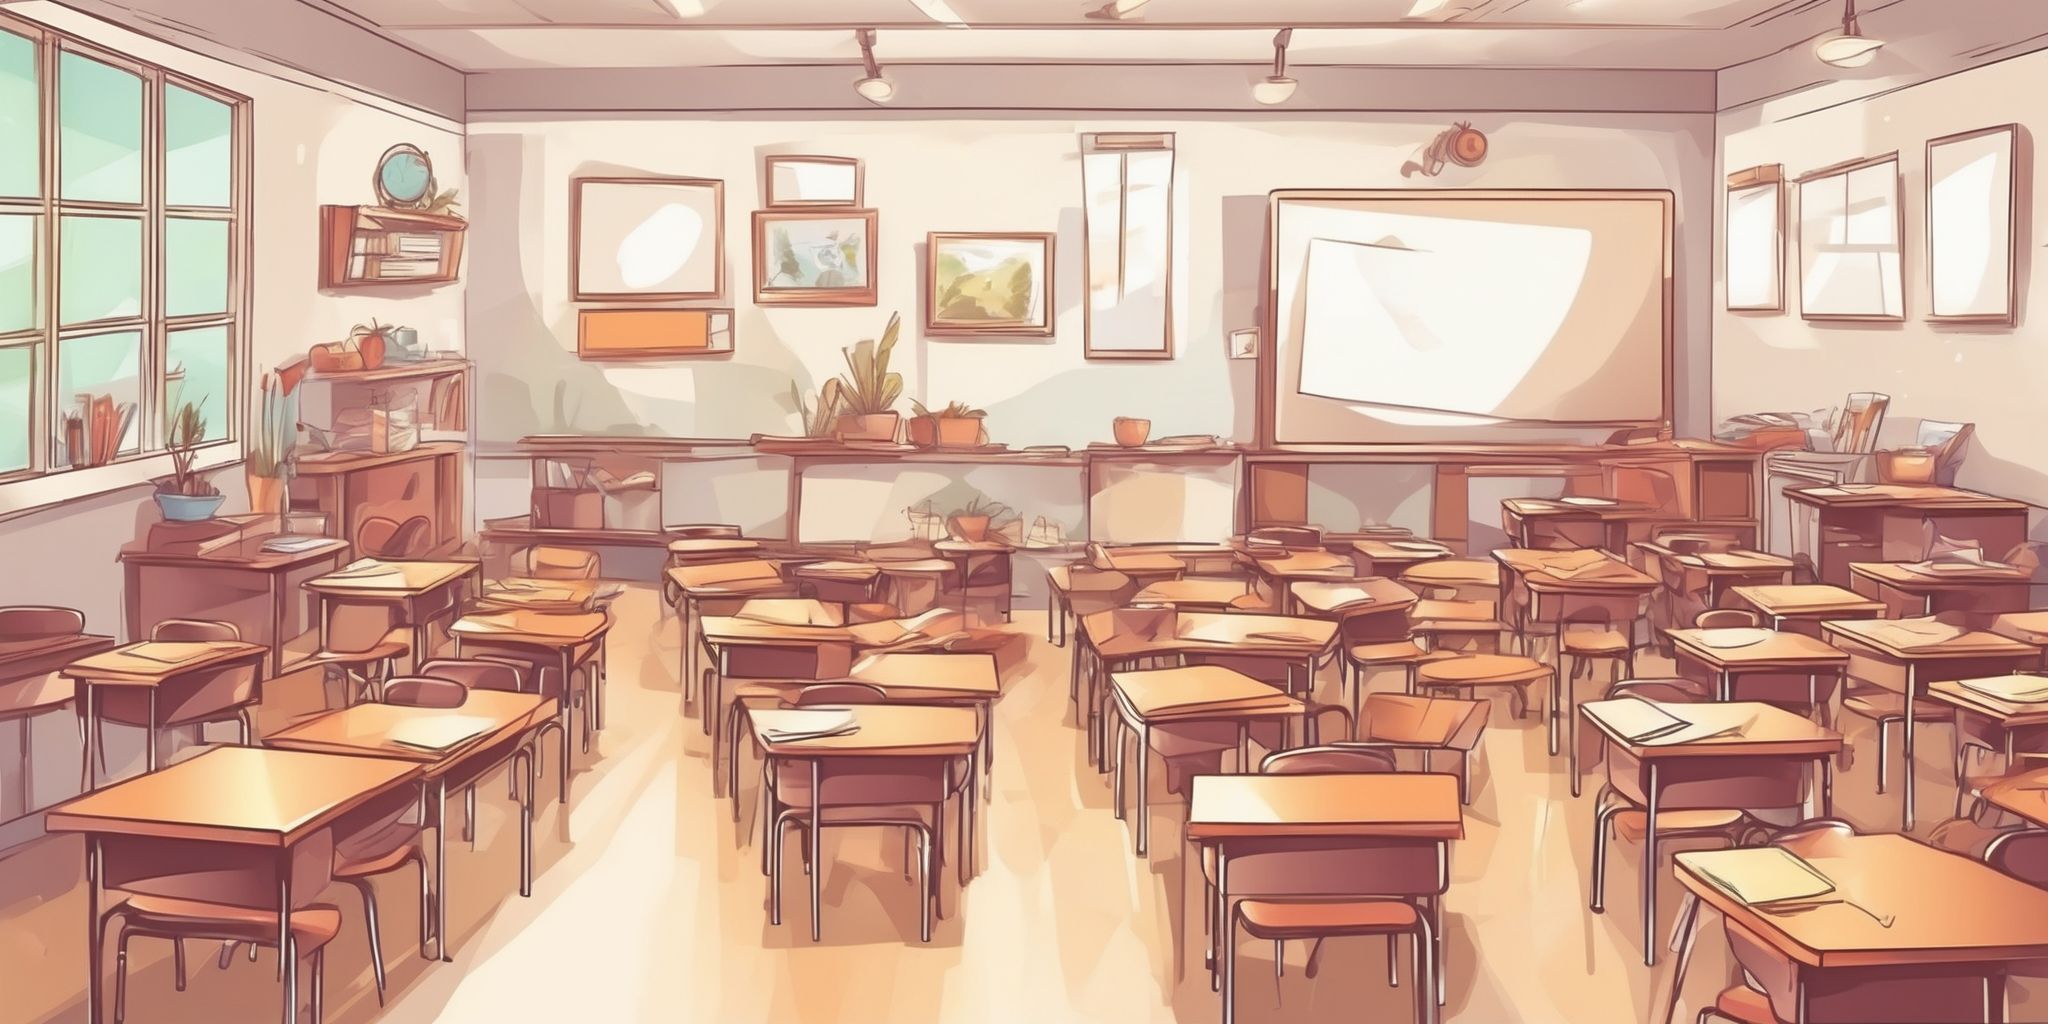 Classroom in illustration style with gradients and white background